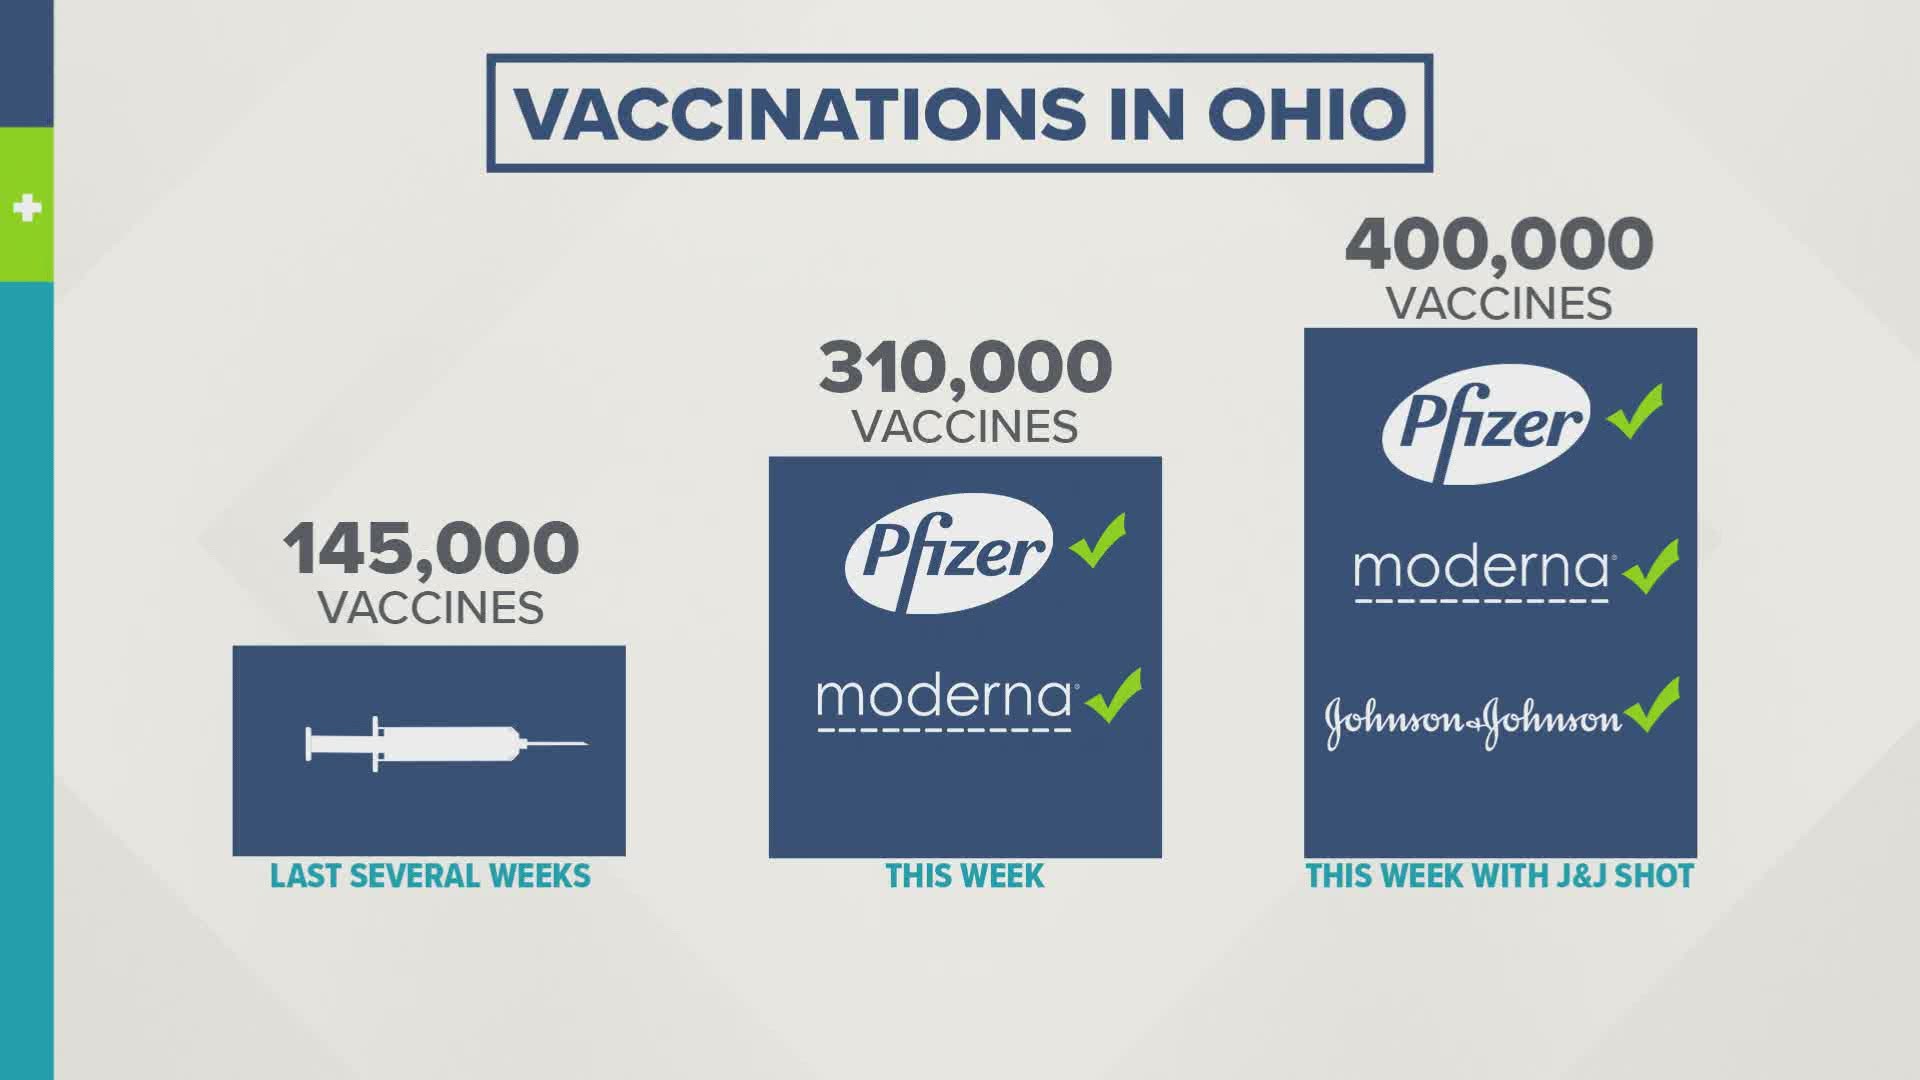 Ohio Gov. Mike DeWine says the approval of a third coronavirus vaccine means the state will receive nearly 450,000 doses this week.